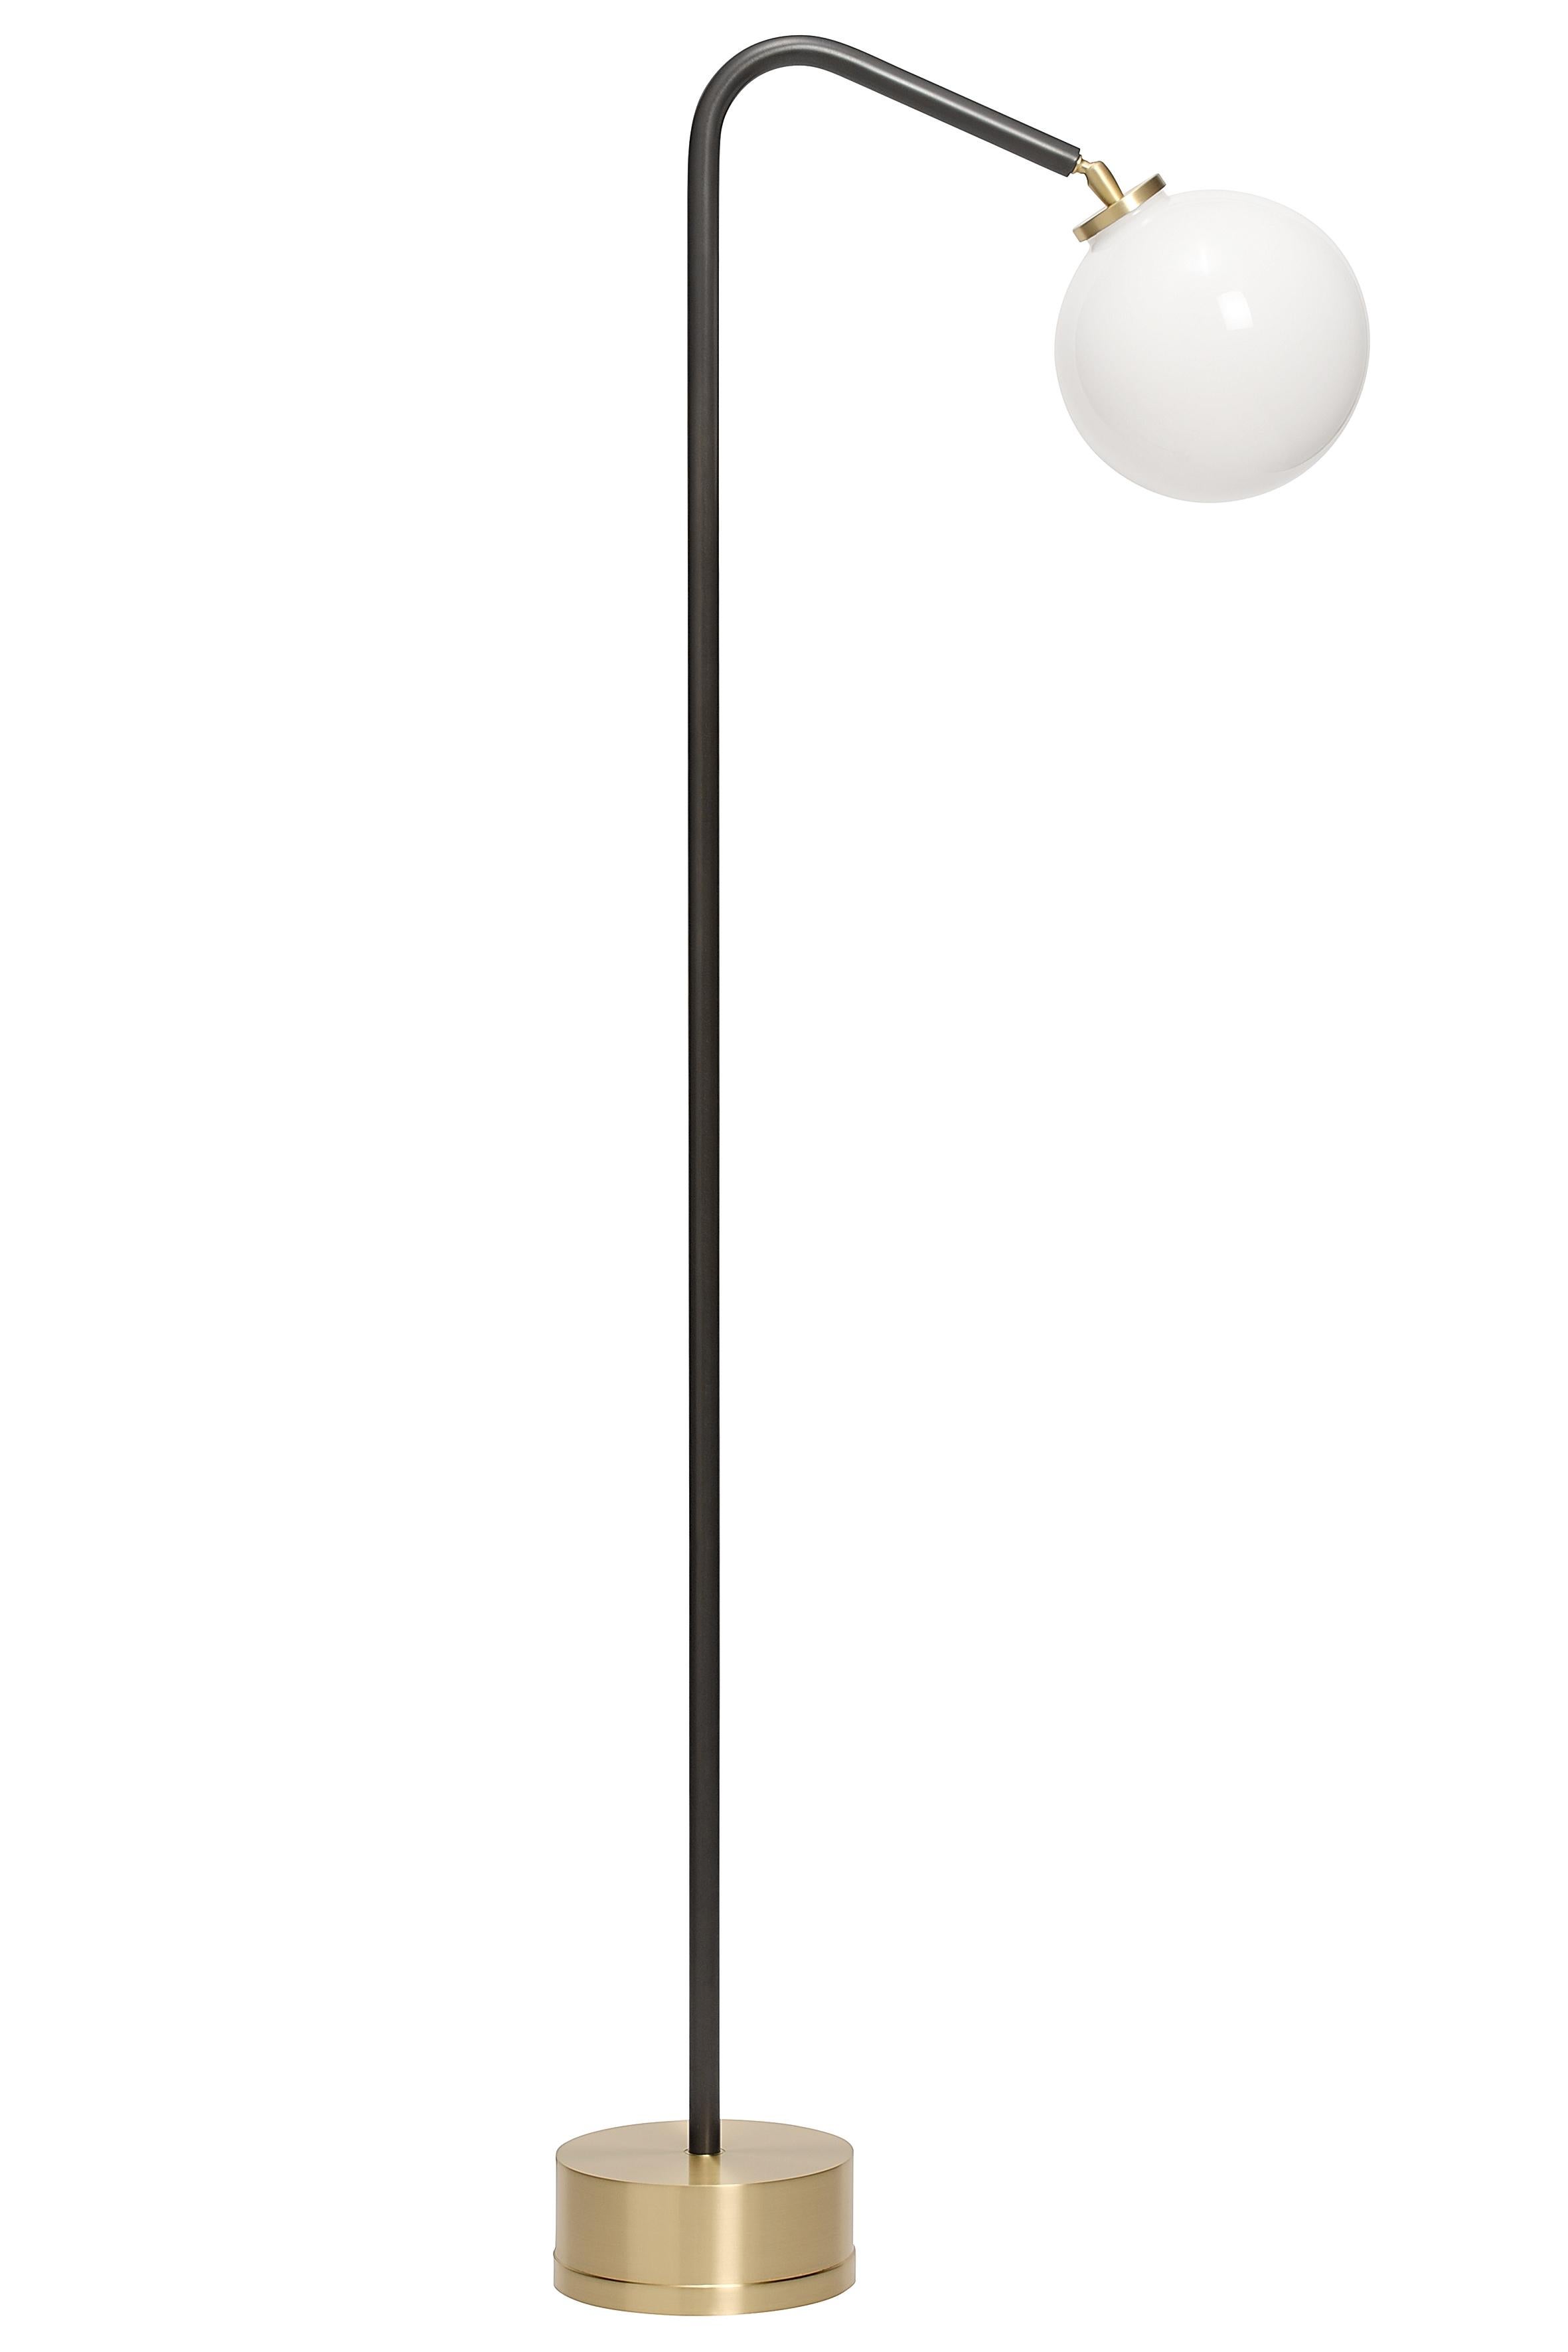 Oscar floor lamp by CTO Lighting
Materials: bronze stem with satin brass base and opal glass shade
Also available in satin brass stem with satin brass base with opal glass shade
Dimensions: H 133 x W 34 cm 

All our lamps can be wired according